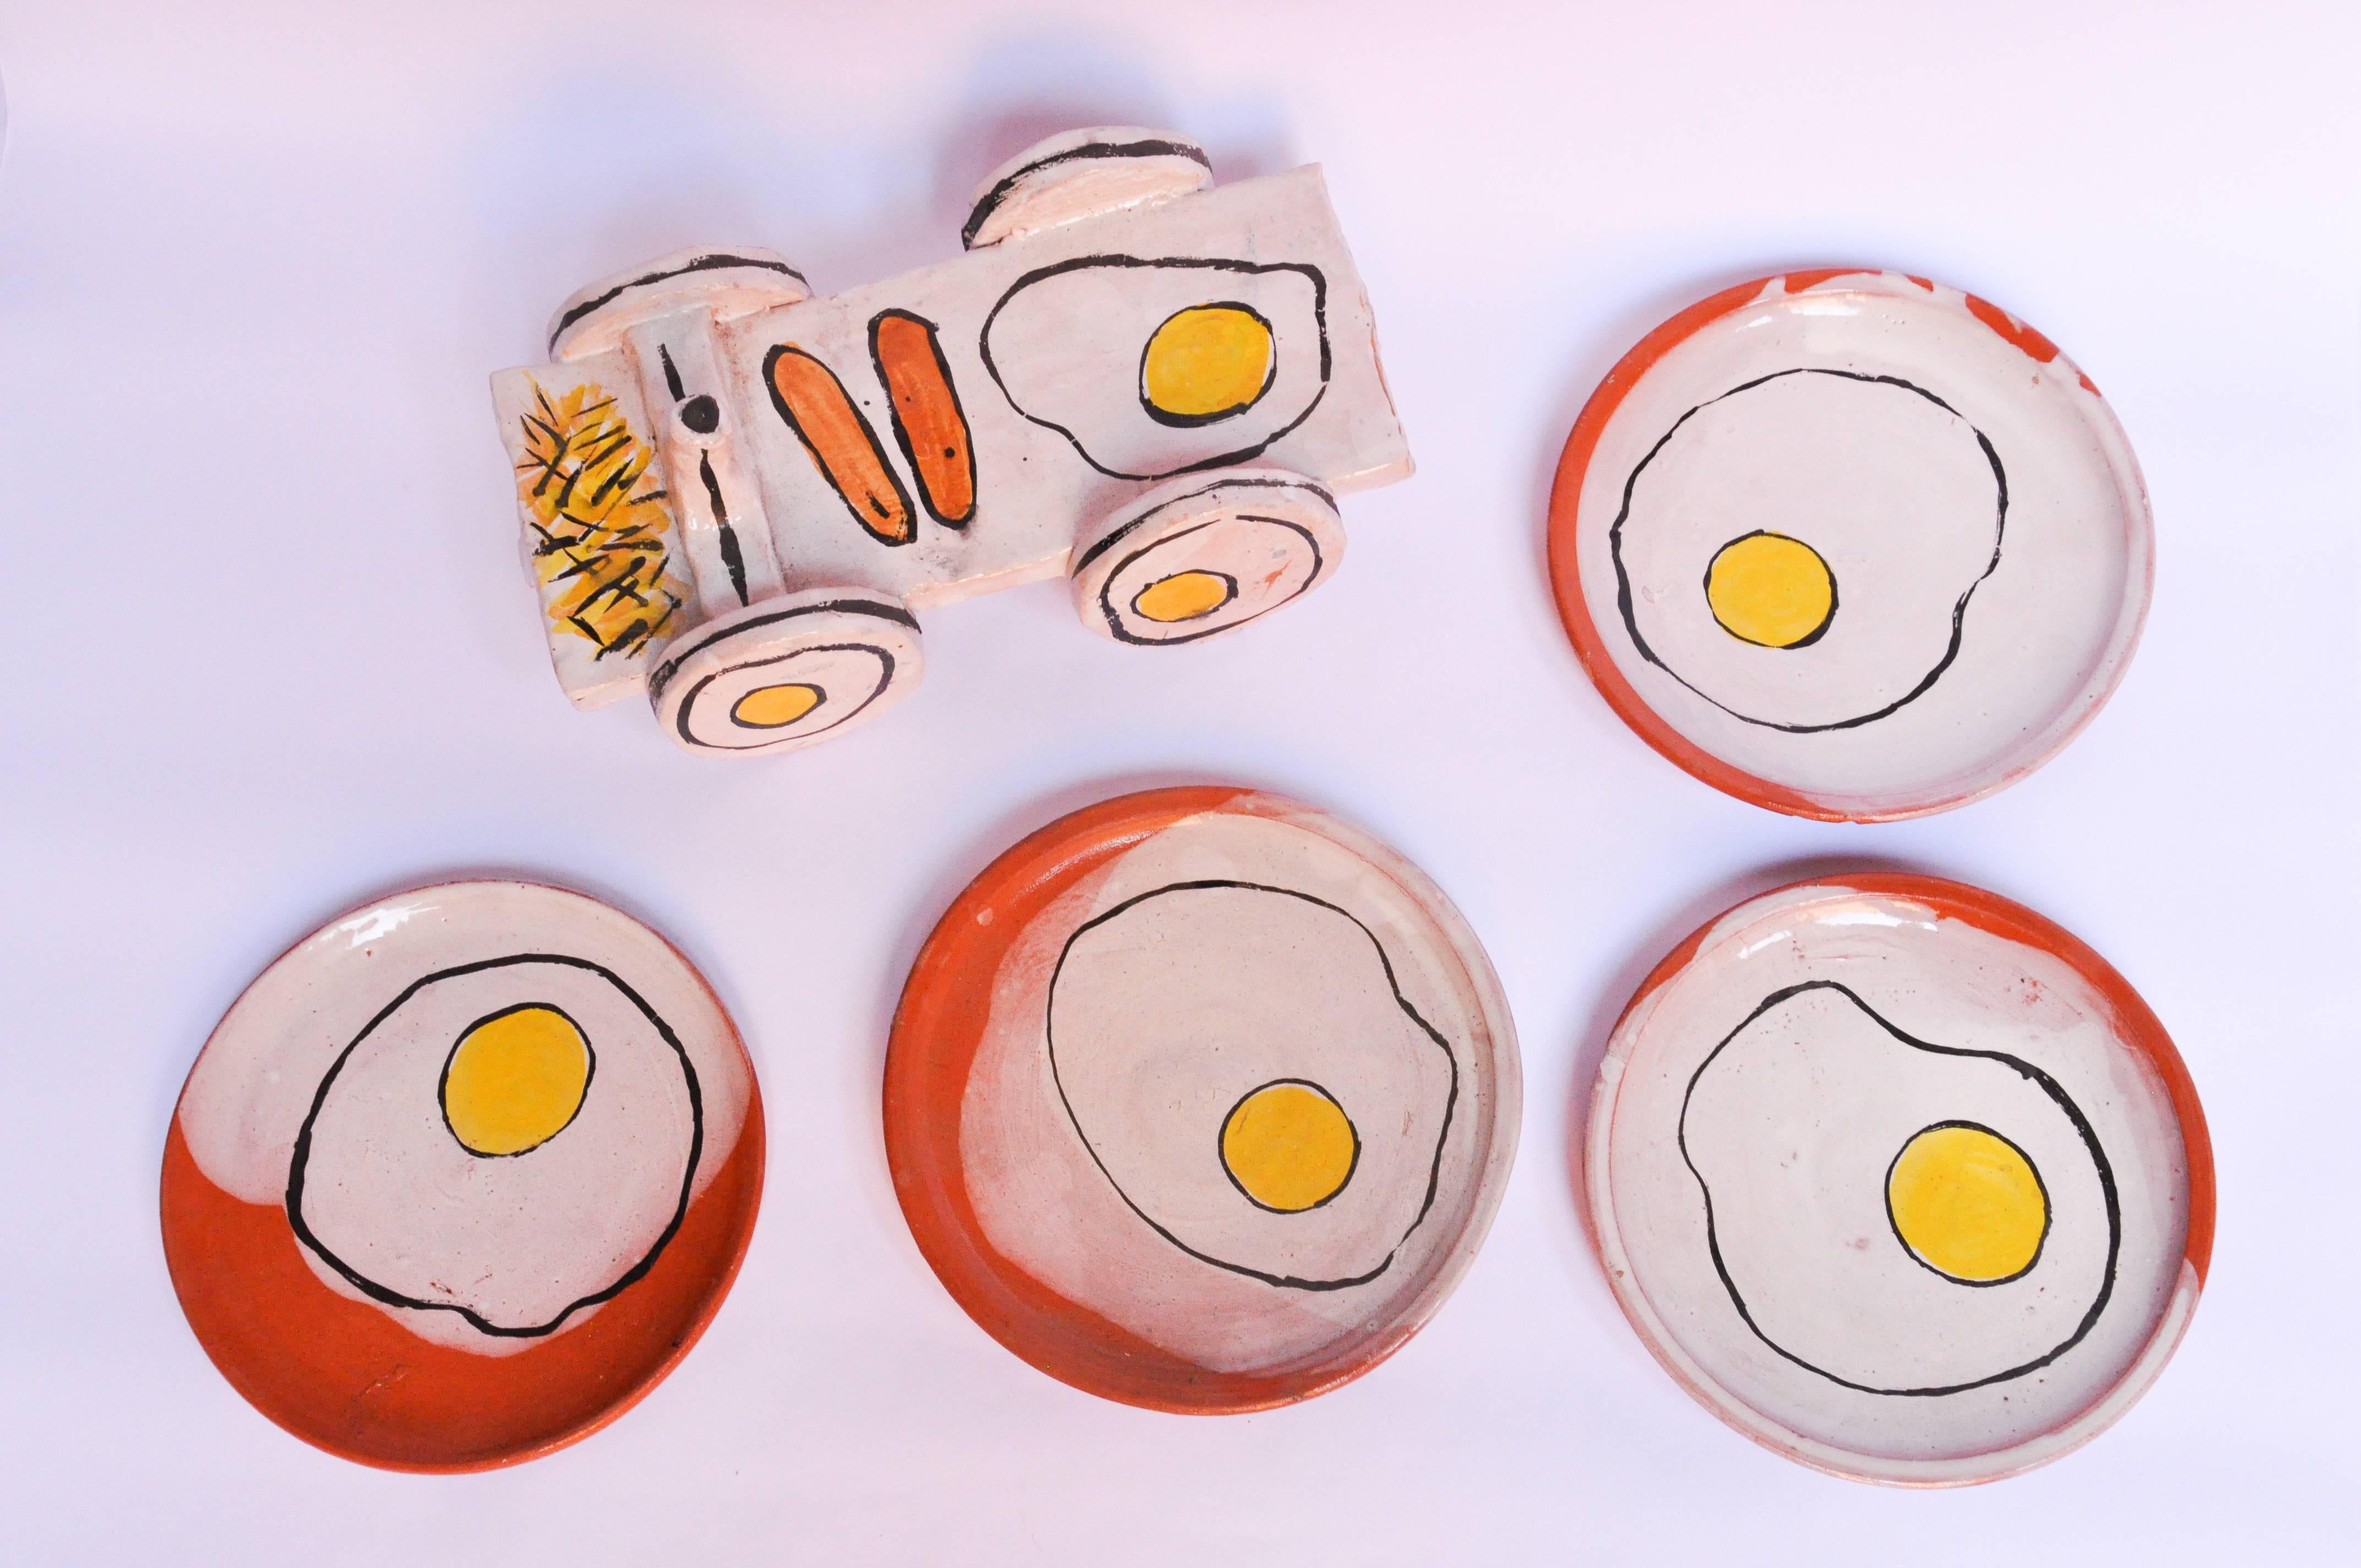 Ceramic four-plate set with modern egg design by Lorenzo Lorenzzo. Cart used for salt and pepper. 

Lorenzo's work alludes to his favorite meal, breakfast, creating a modern design for this plate collection.